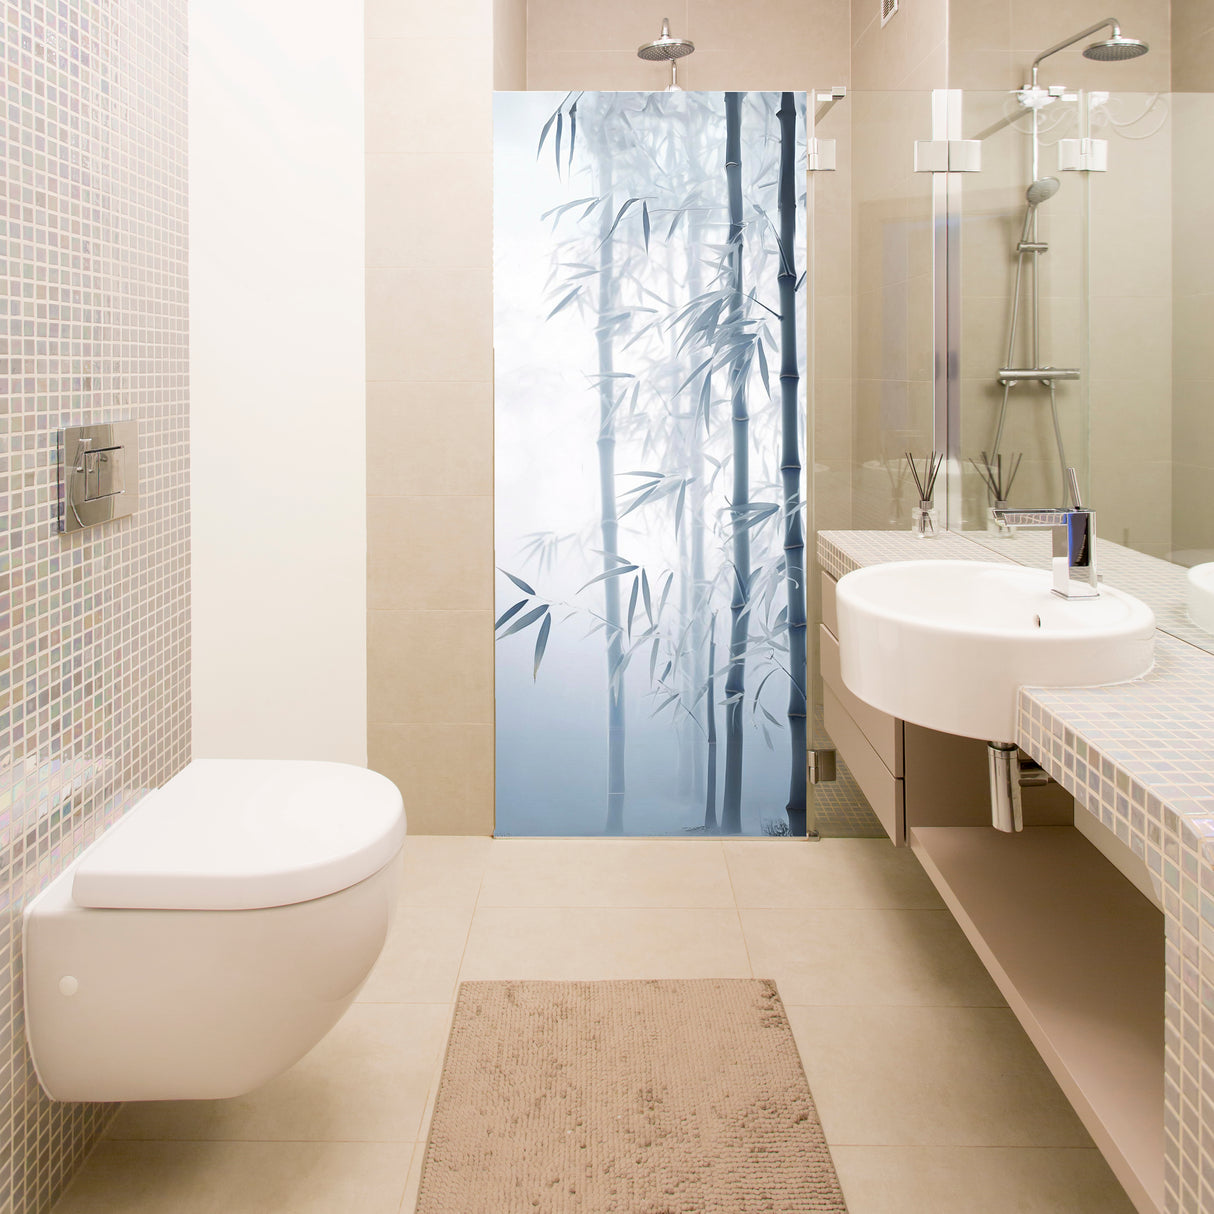 Shower Door Decal Tranquil Bamboo Forest - Ethereal Misty Reed Sticker for Bathroom Privacy